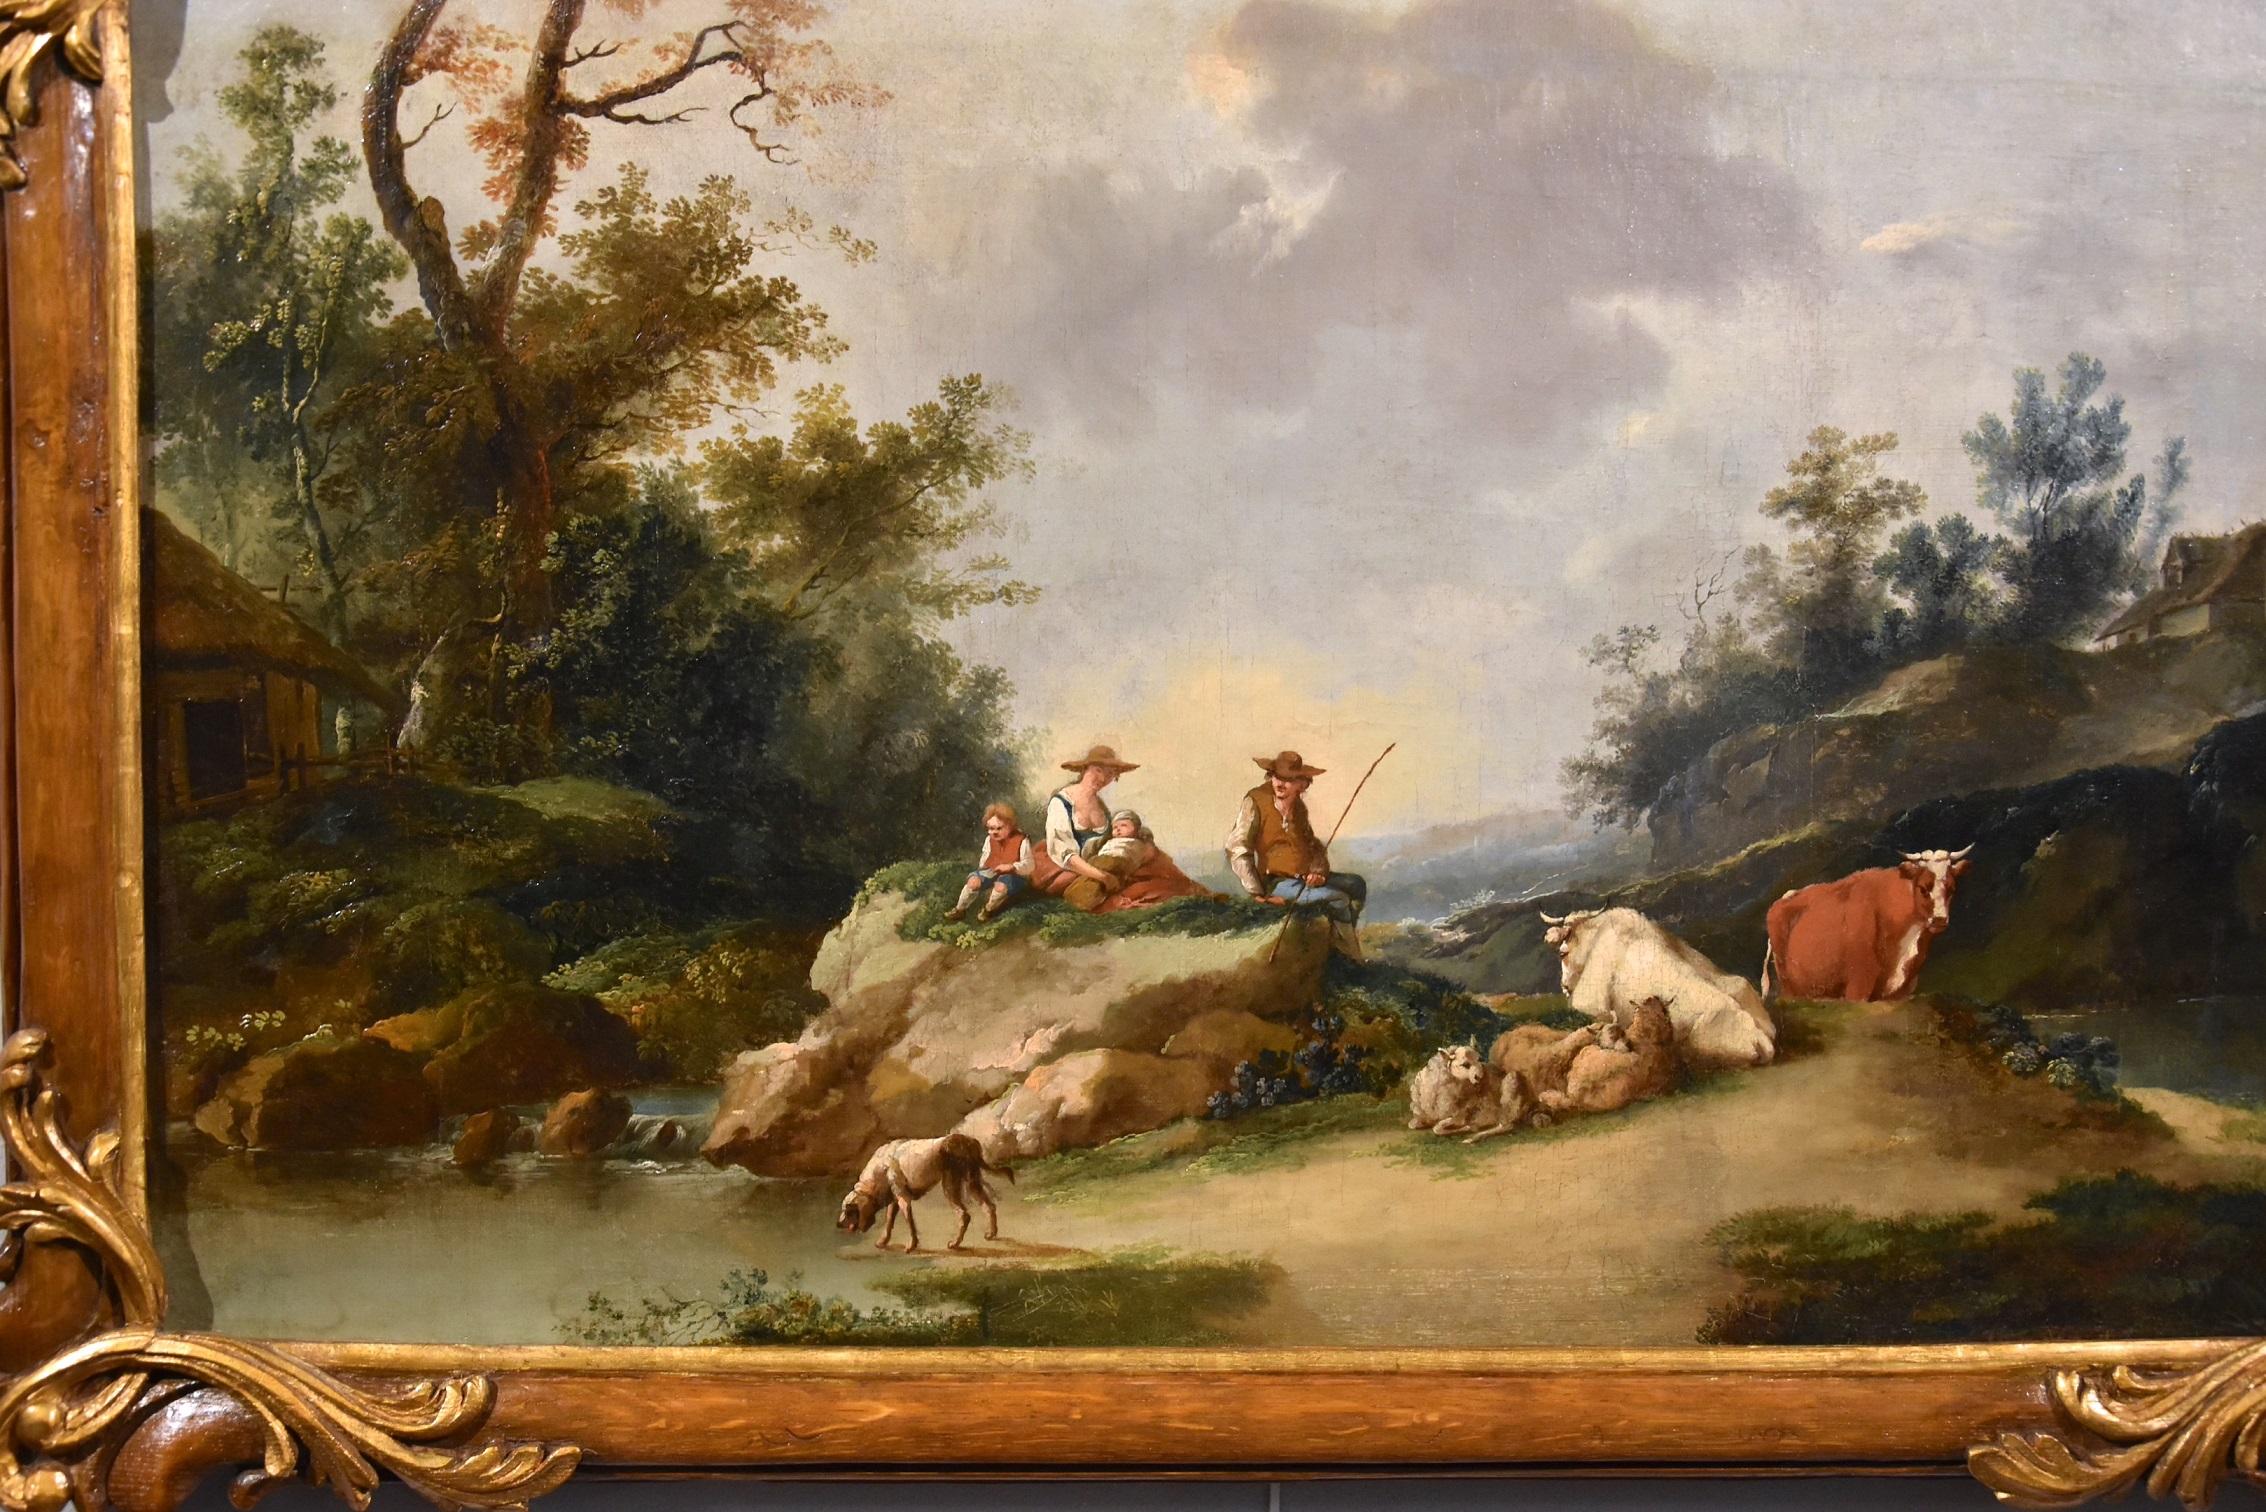 Landscape Zuccarelli Paint Oil on canvas Old master 18th Century Italian View For Sale 4